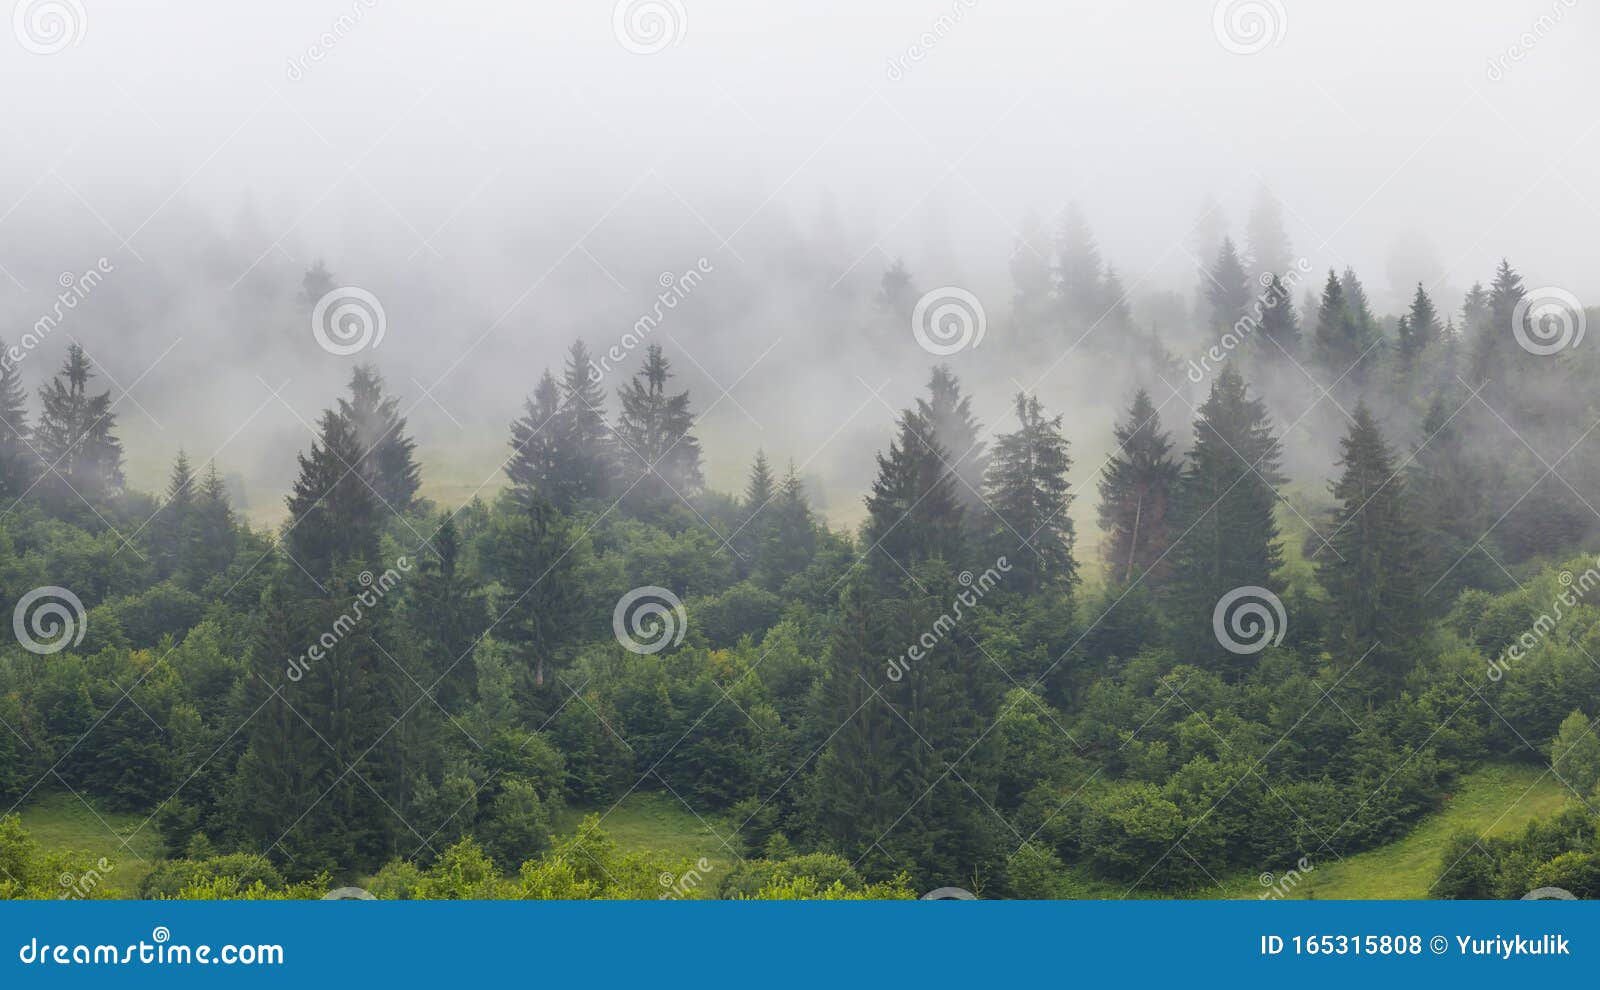 Green Pine Forest On A Mount Slope In A Dense Fog Stock Photo Image